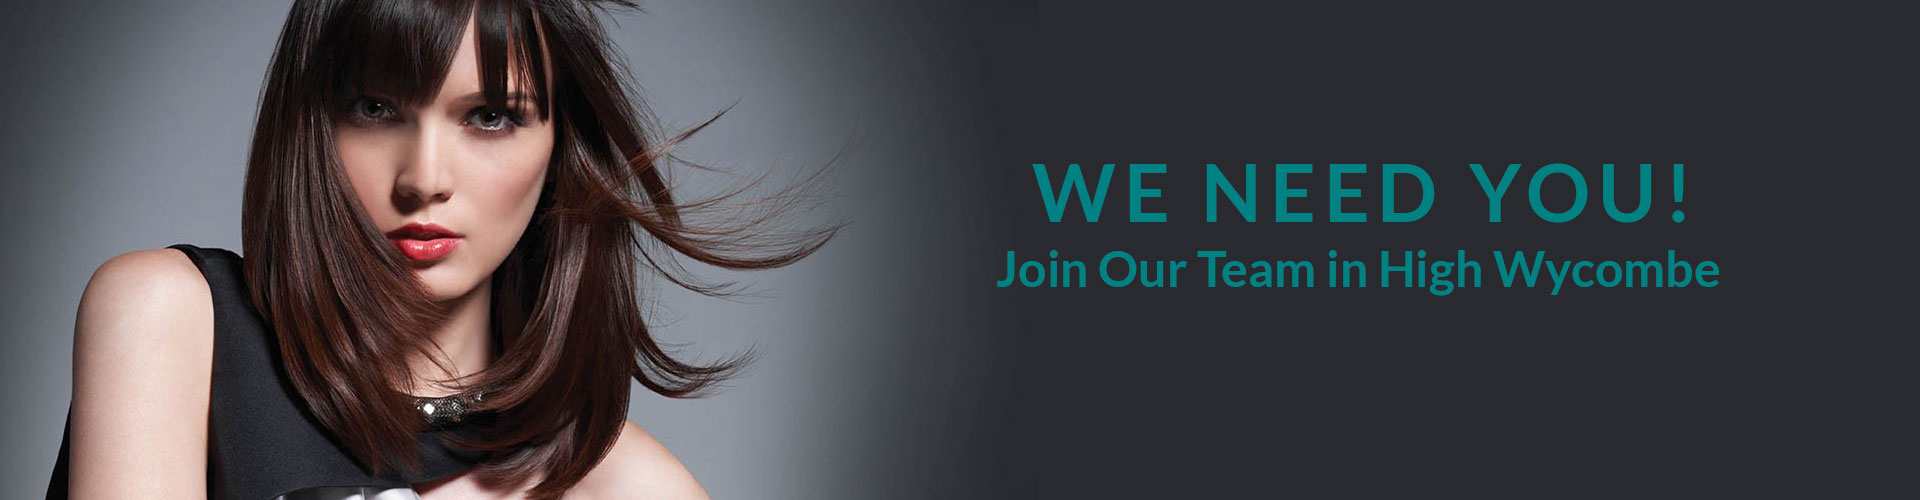 Career Opportunities For Hair Stylists & Salon Assistants At Top Hazlemere Salon, Buckinghamshire